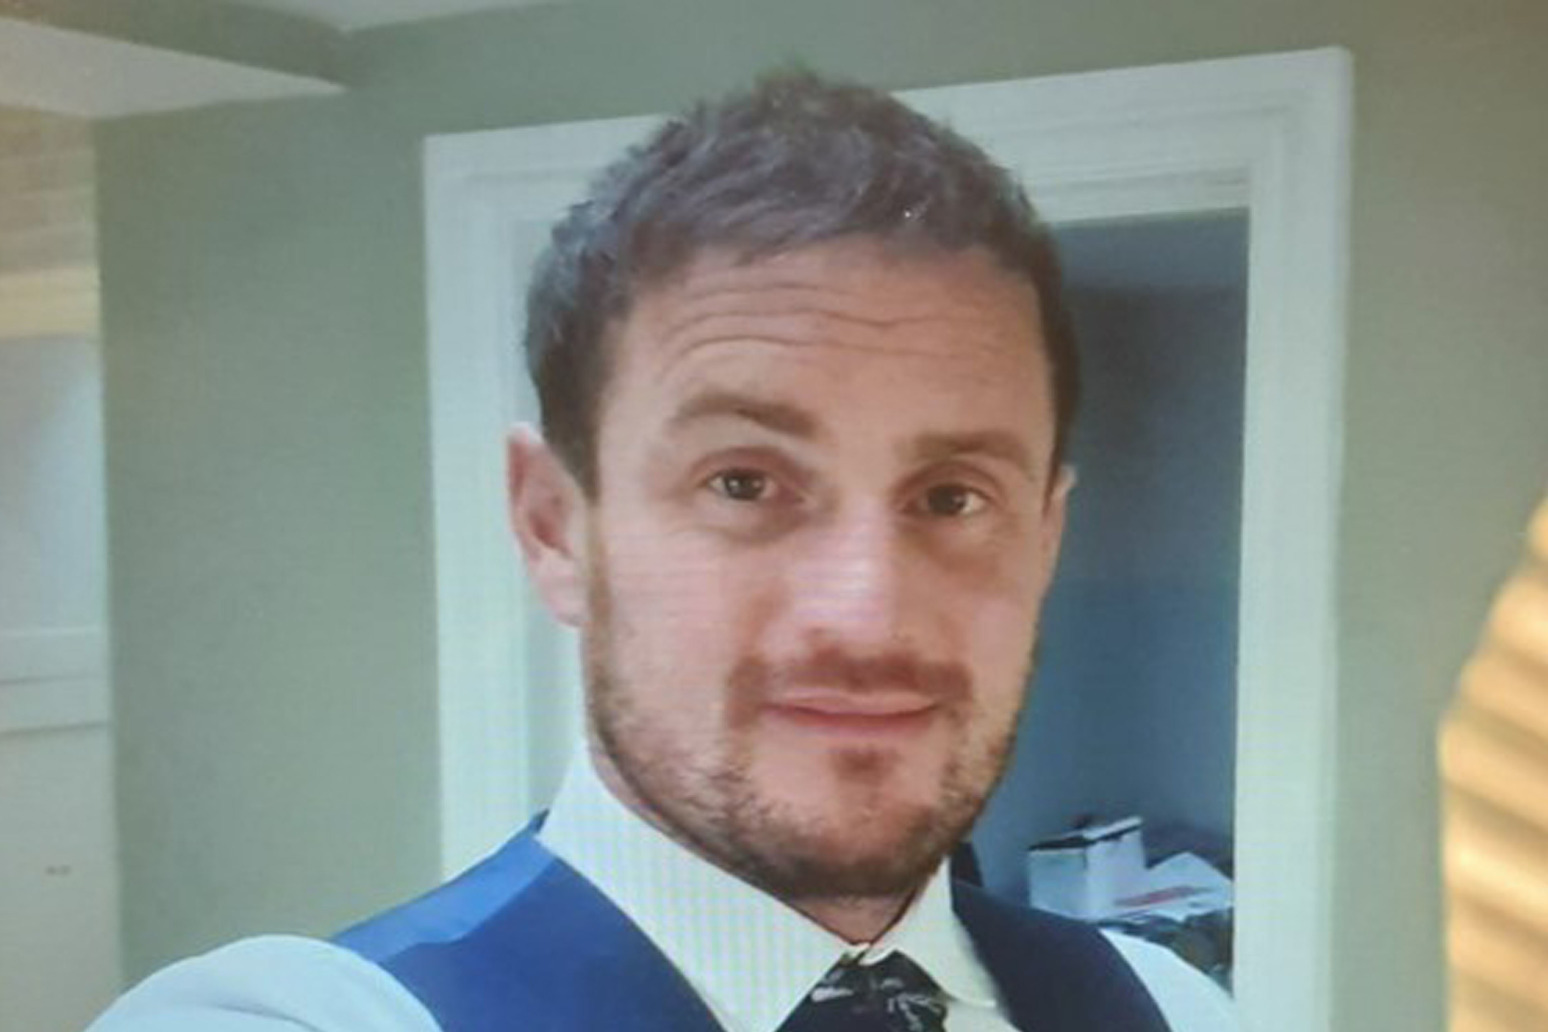 Plea for more information after man charged over shooting and acid attack death 